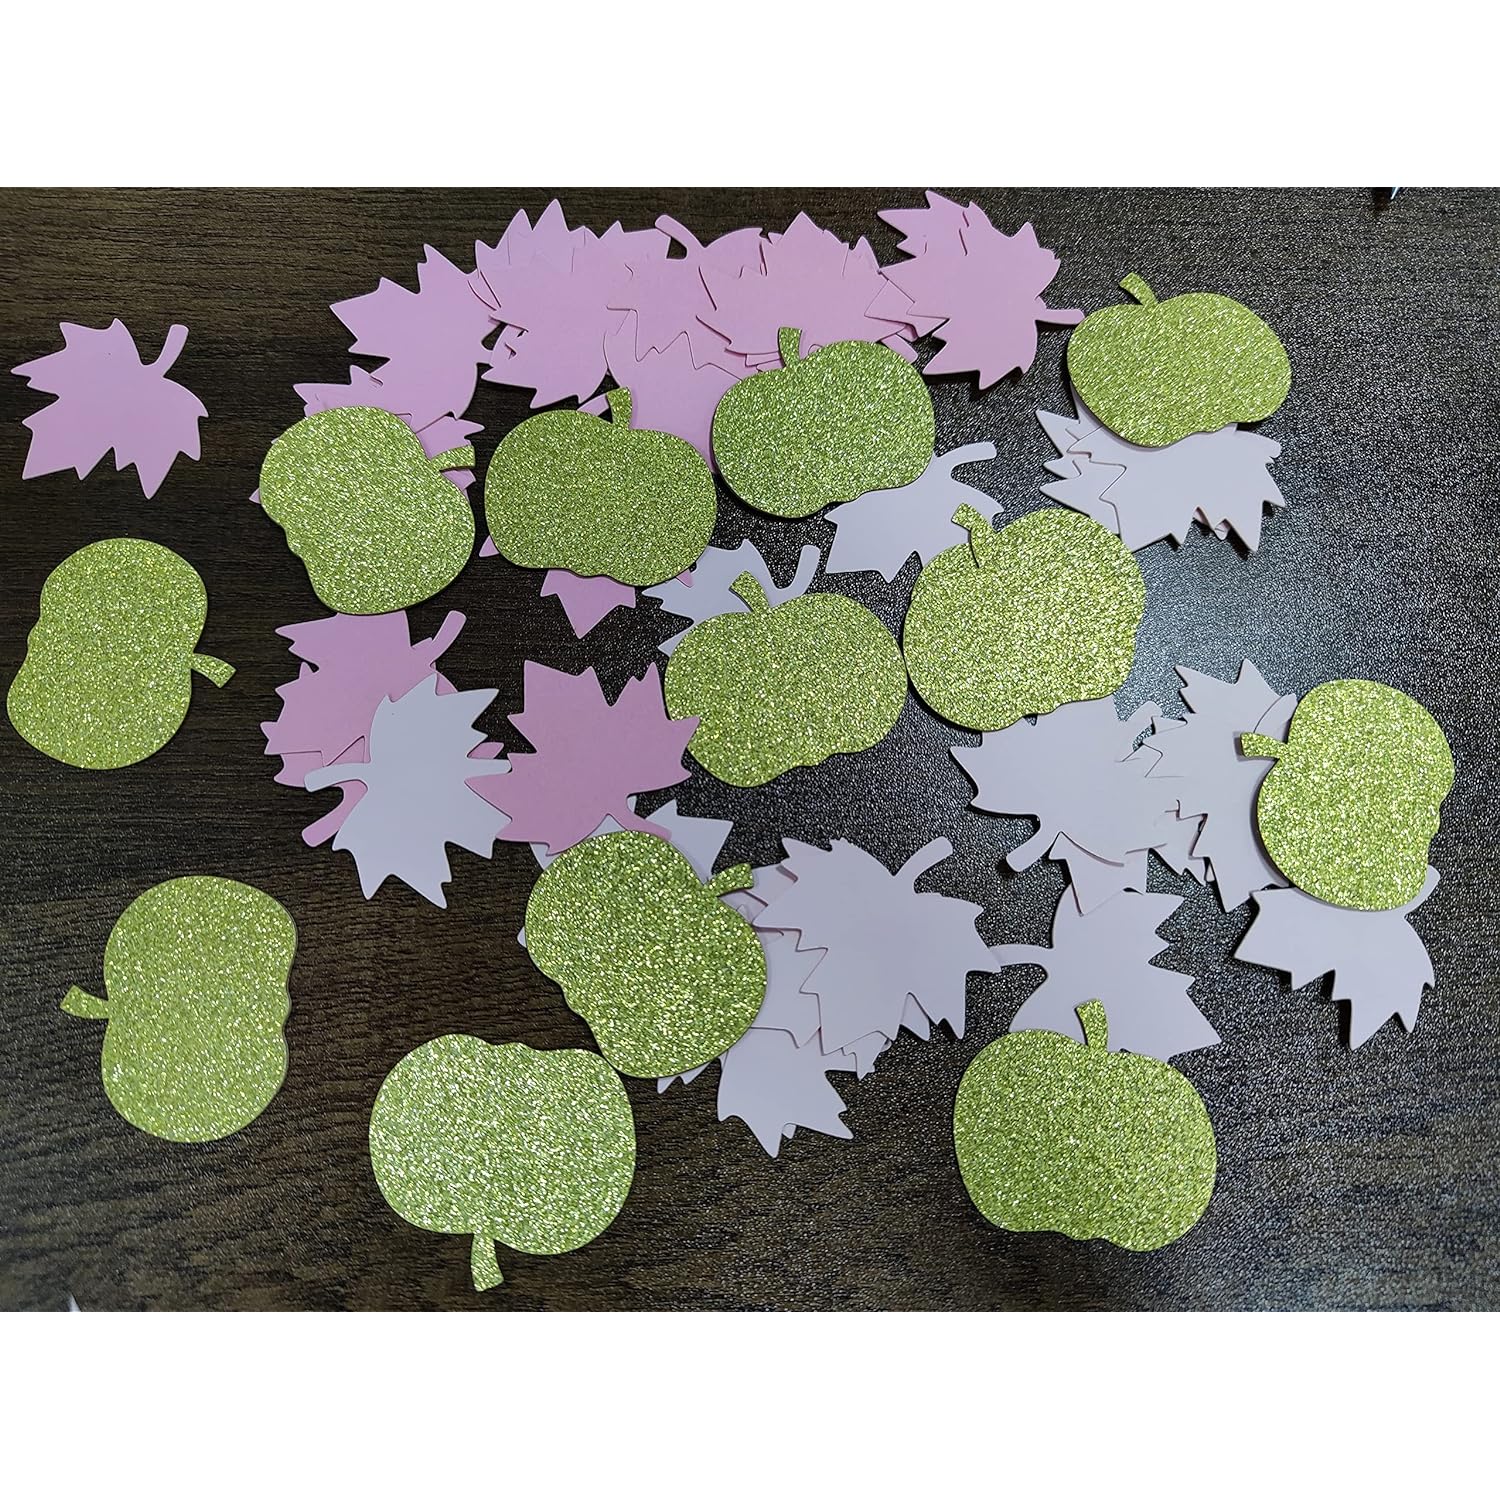 Great Choice Products 200Pcs Pumpkin Maple Leaf Confetti- Fall Pumpkin Birthday Party Decorations,Maple Leaf Decorations,Pumpkin Table Decor,Fall T…